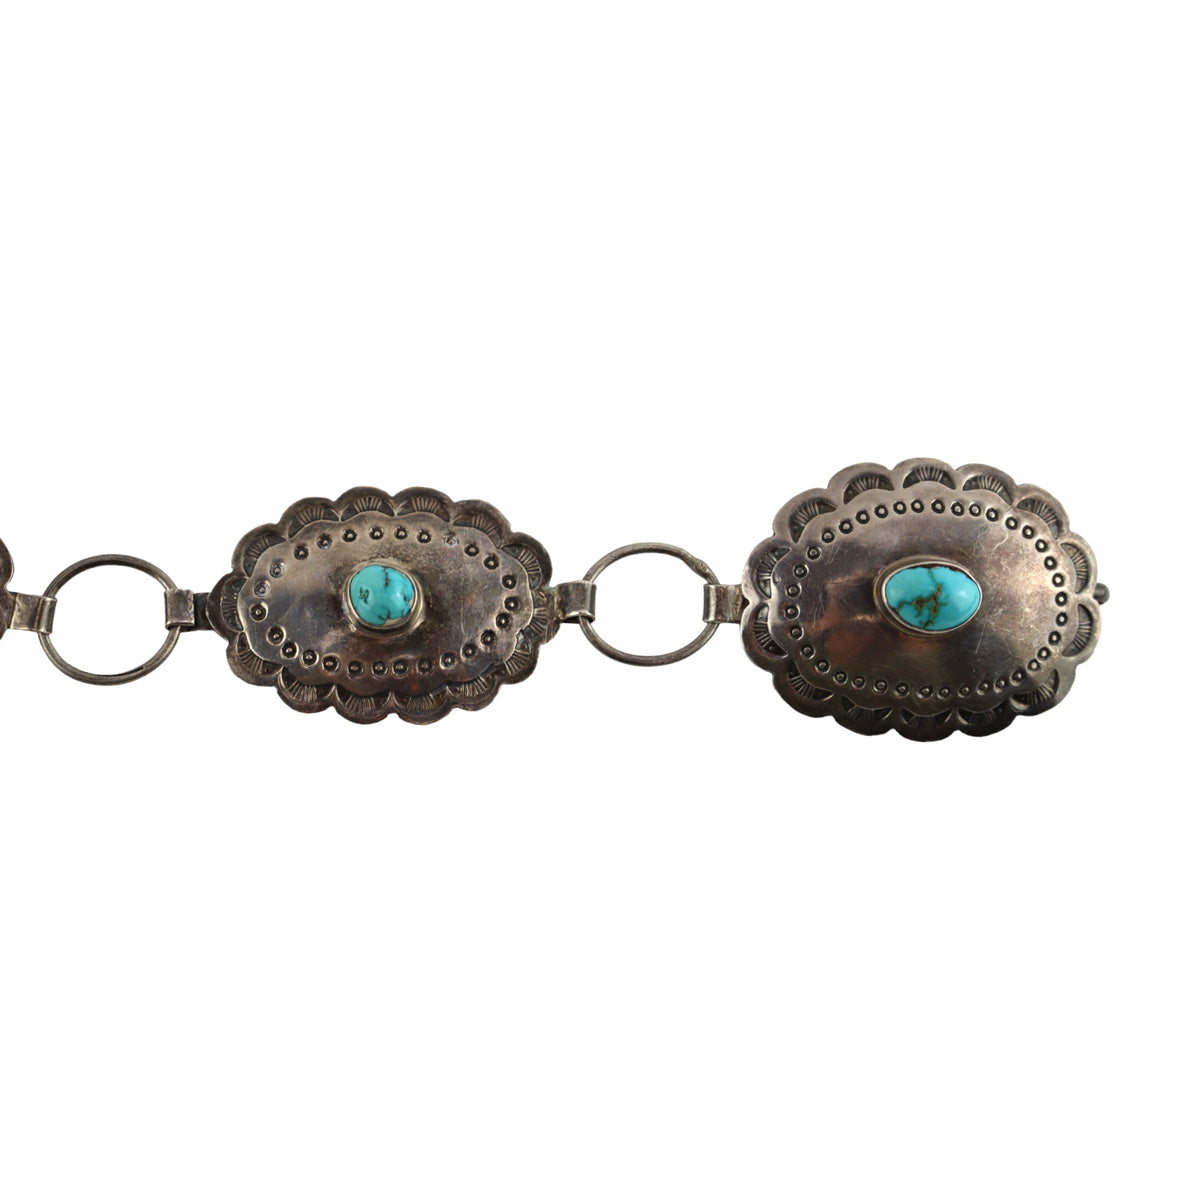 Navajo - Turquoise and Silver Link Concho Belt c. 1980-90s, 37" length (J16082)